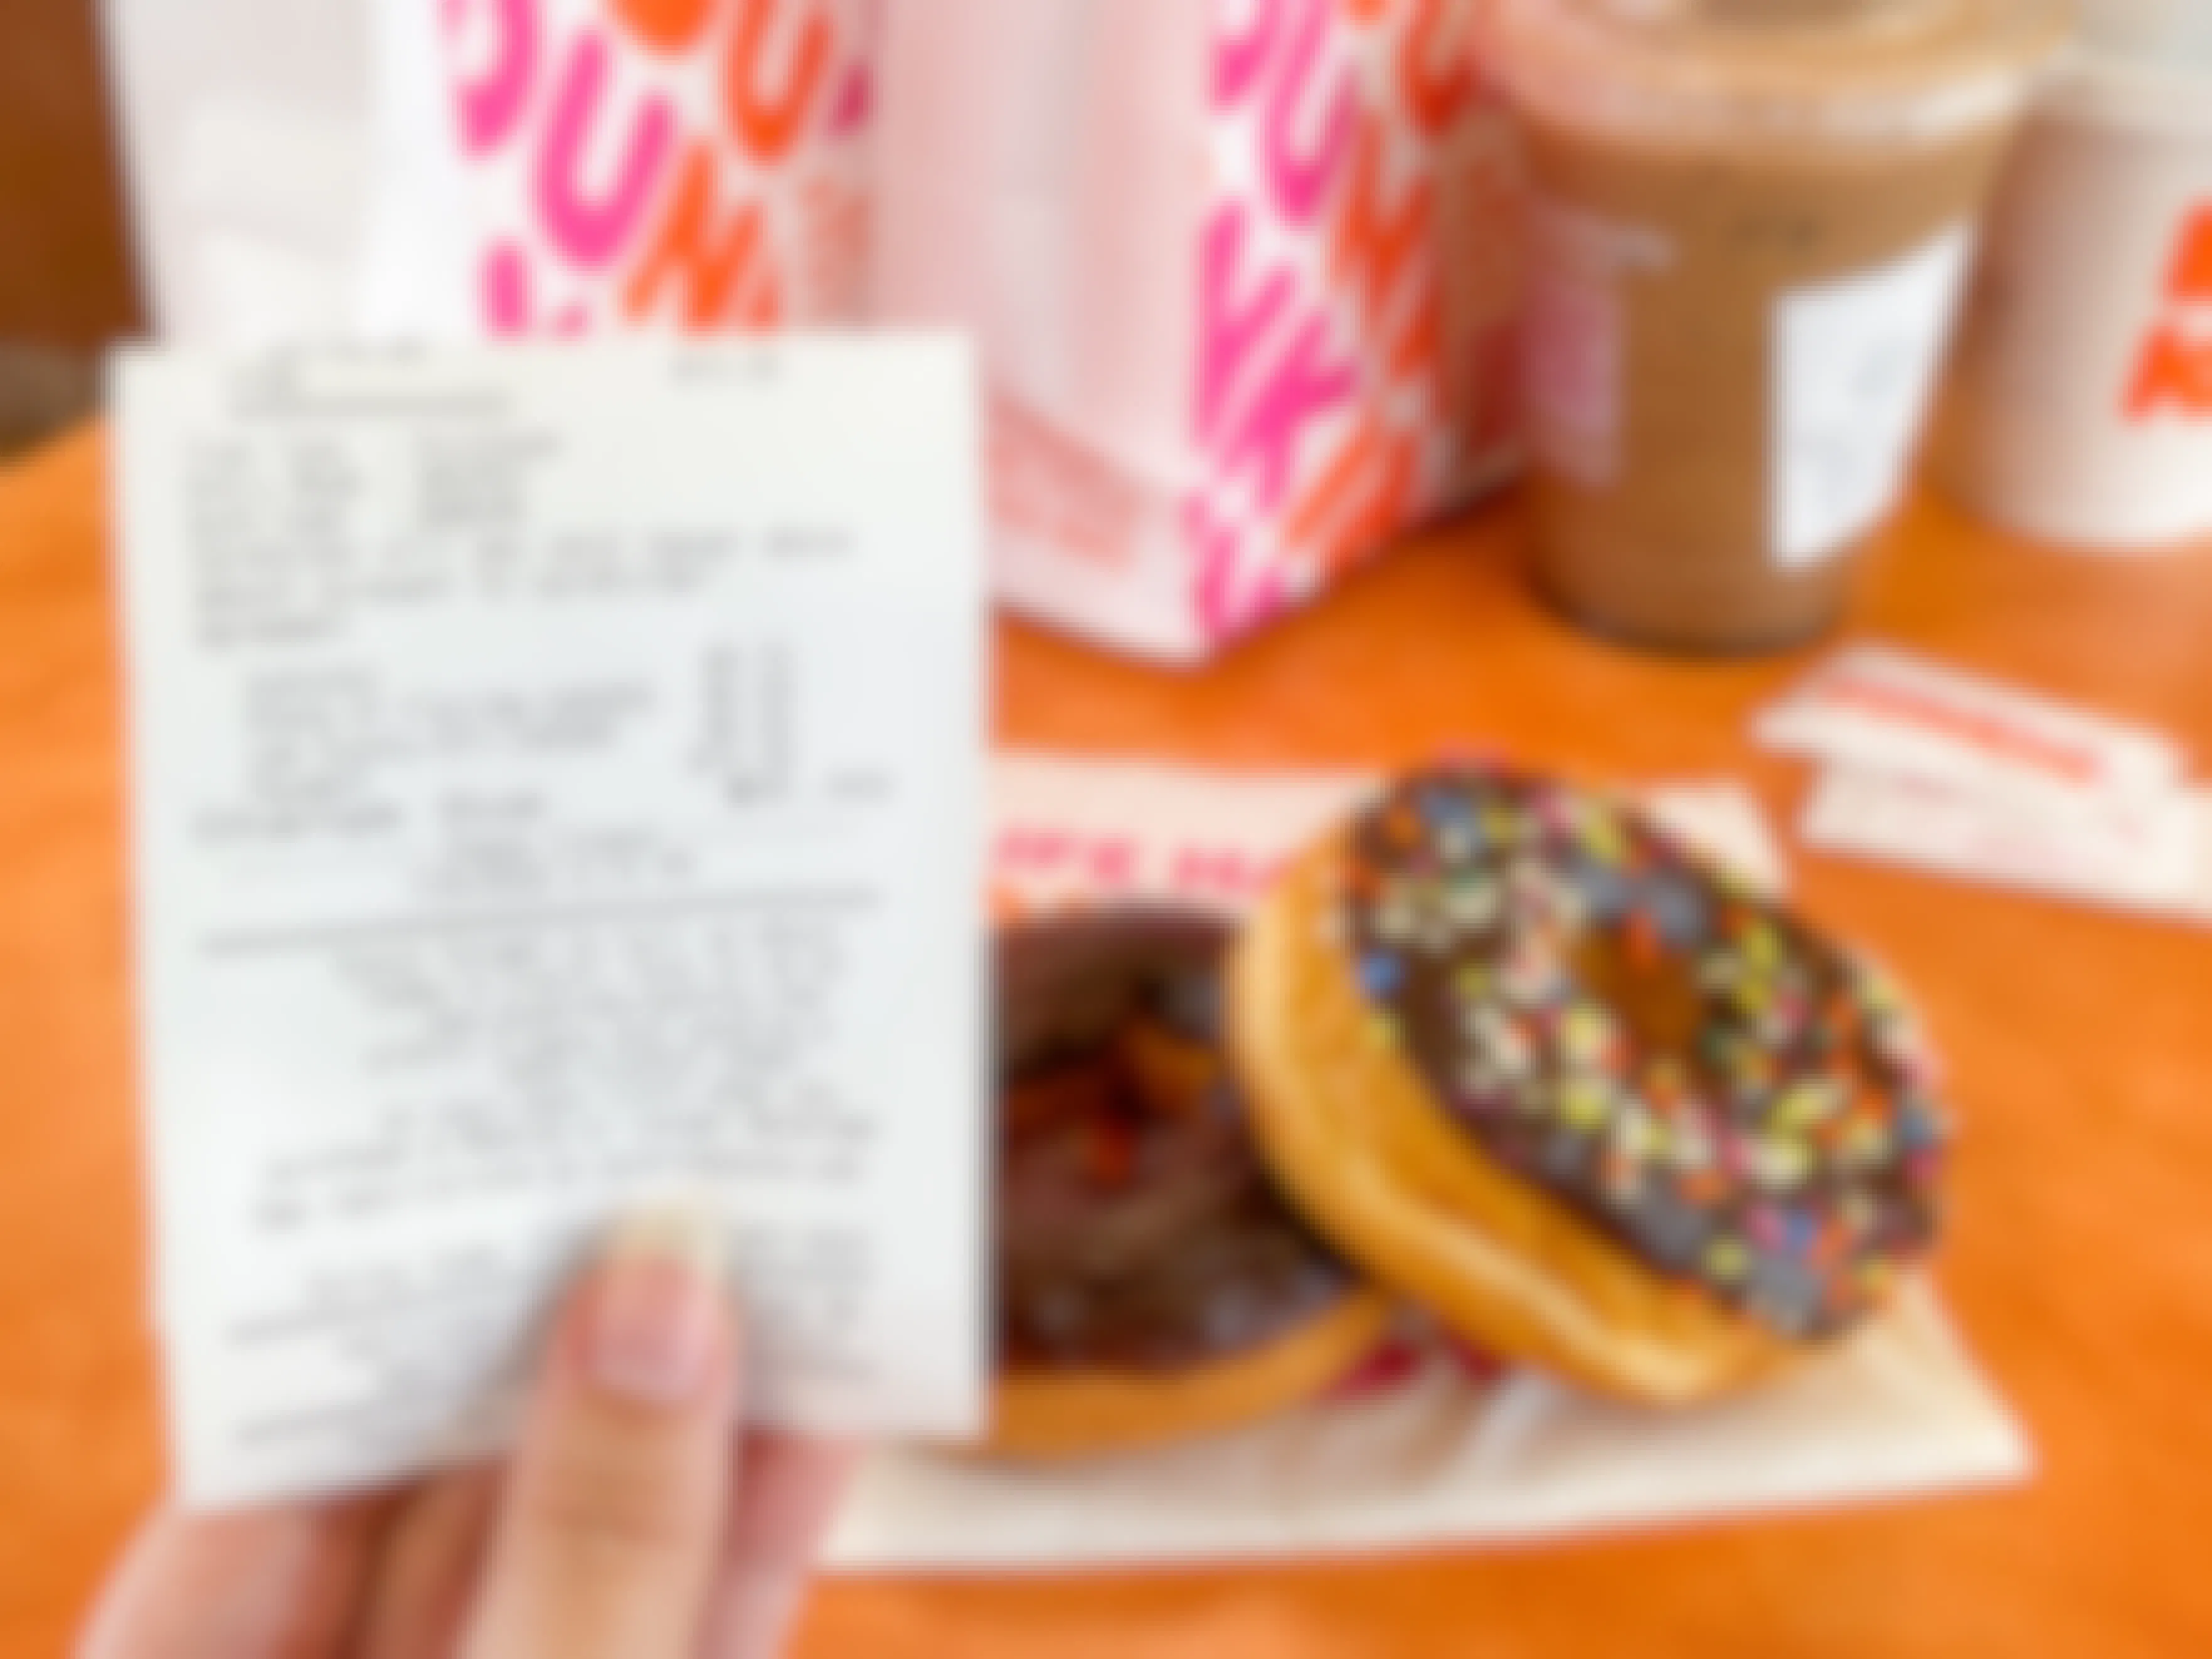 A person's hand holding a receipt offering a free donut for taking the survey printed on the bottom with some donuts, two Dunkin Donuts coffee drinks, some sugar packets, and Dunkin bags on the table in the background.